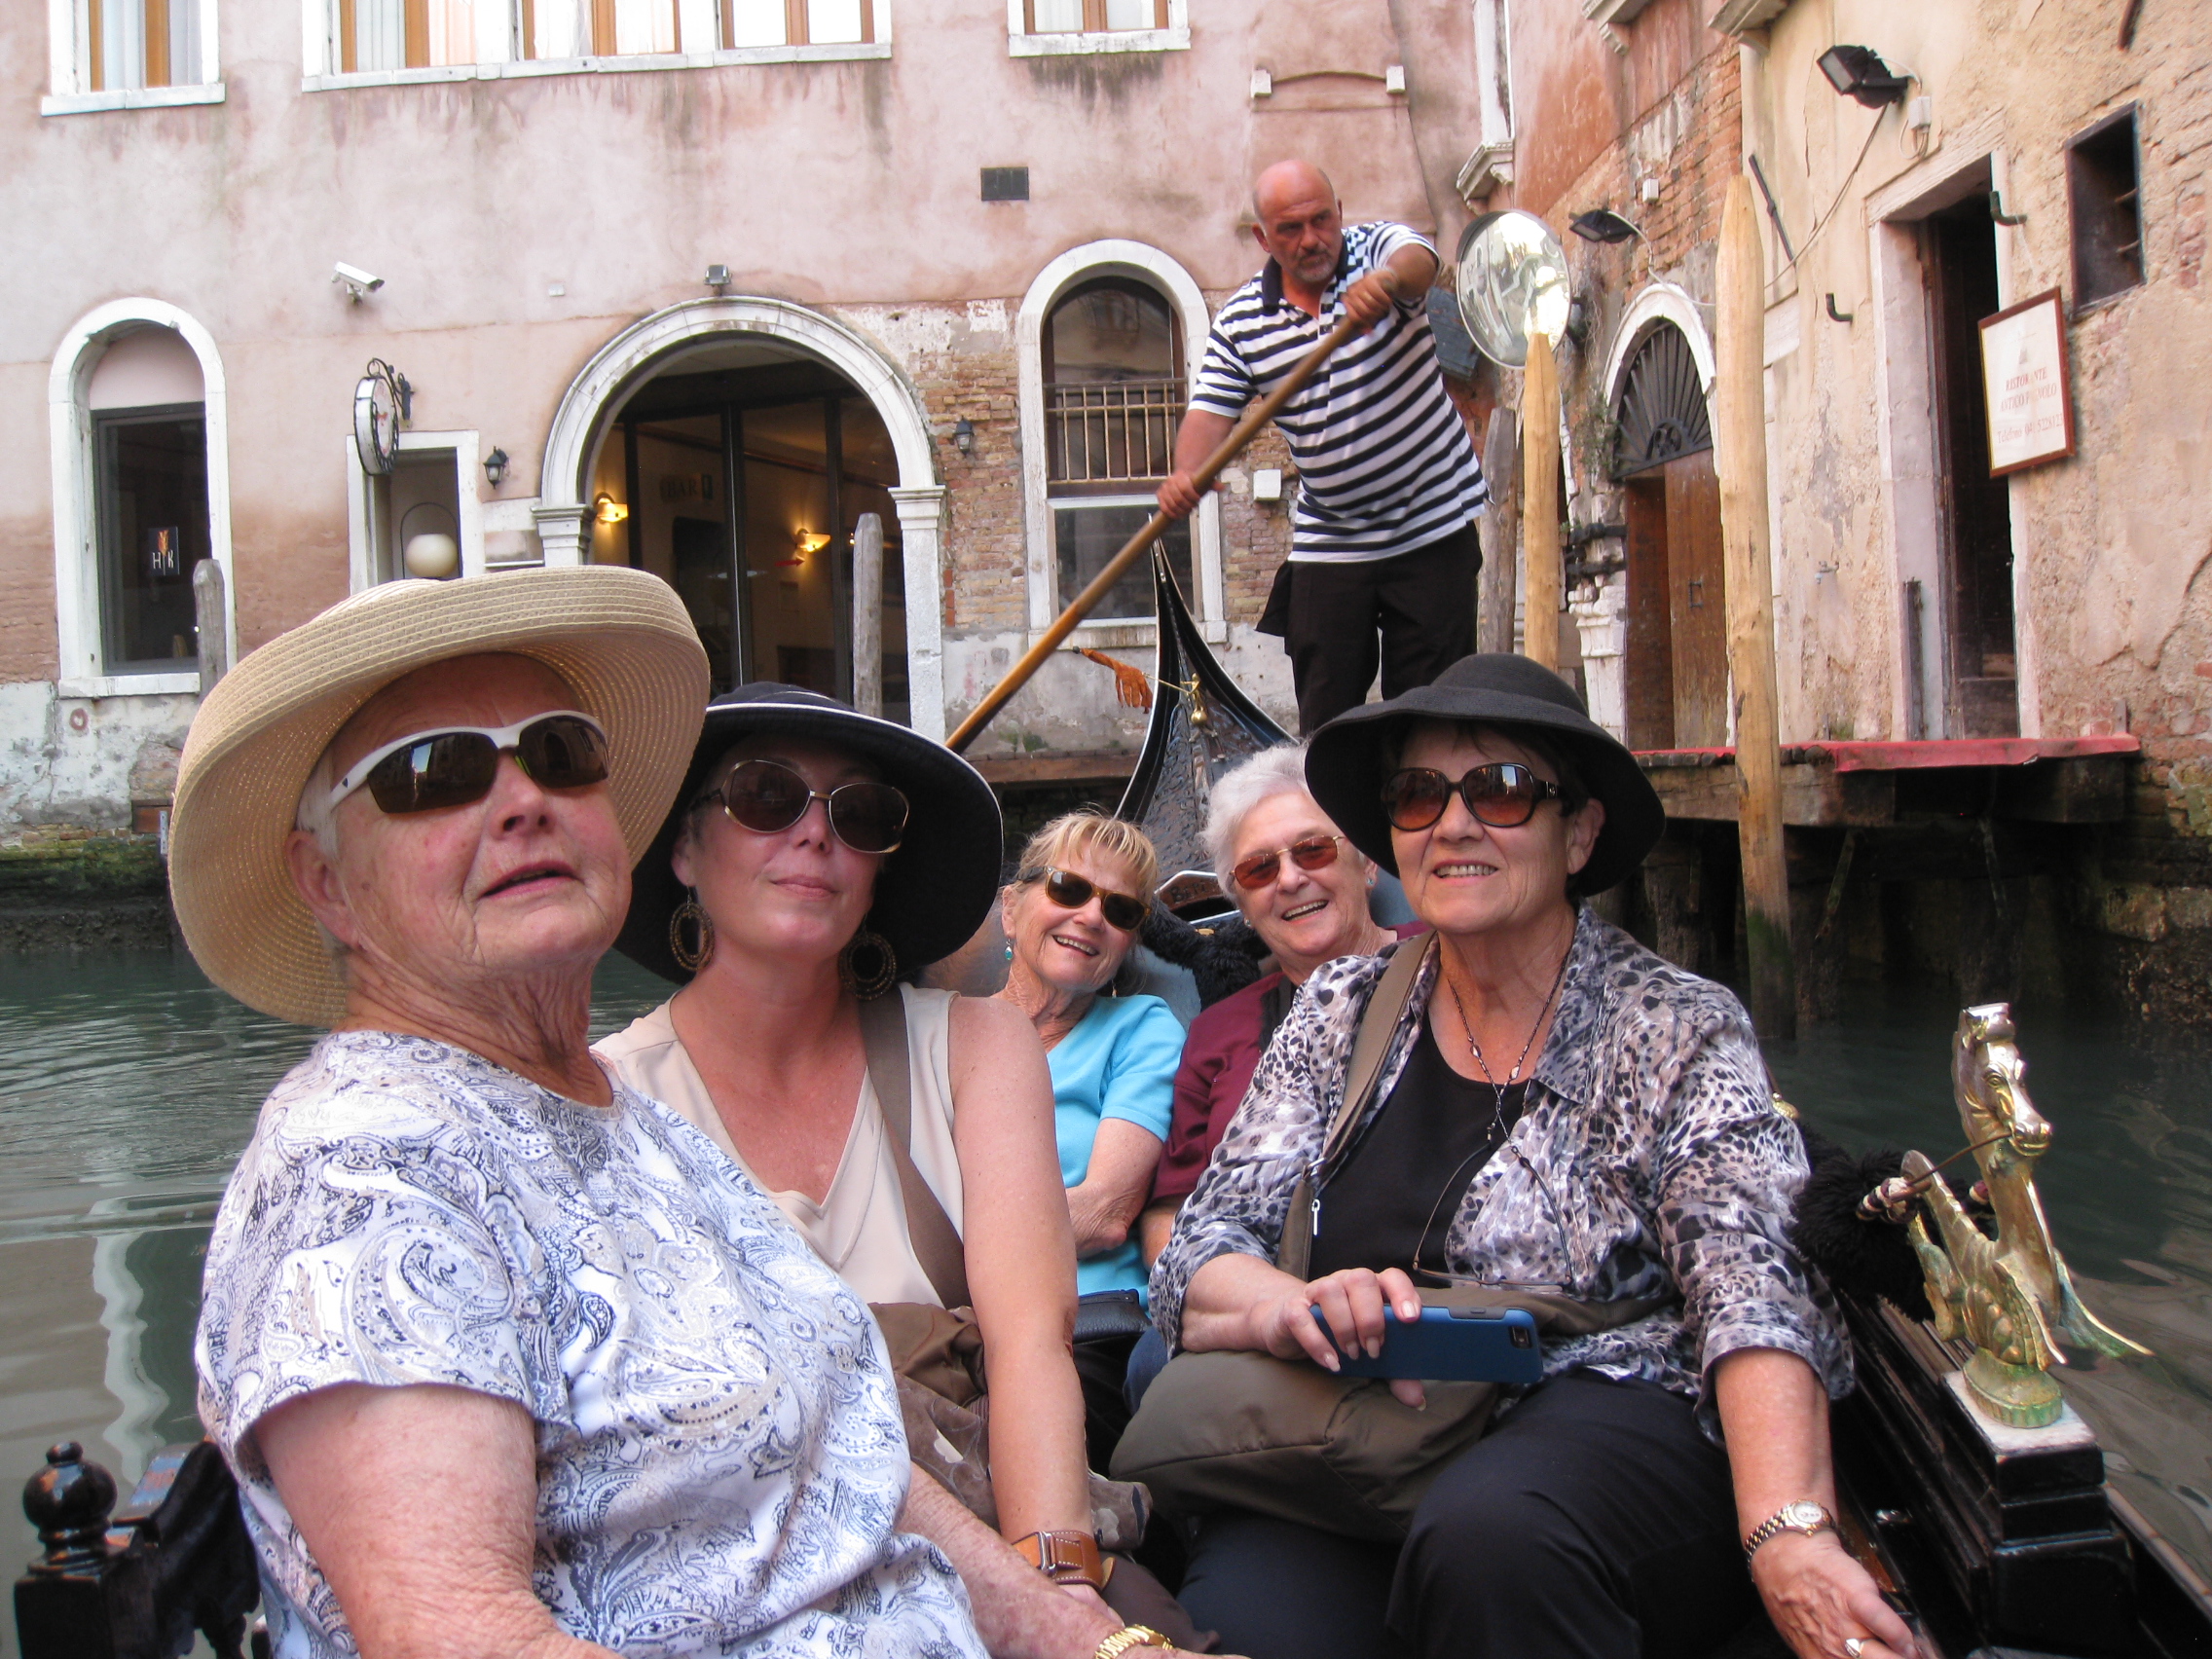 Yes, we rode in a gondola.